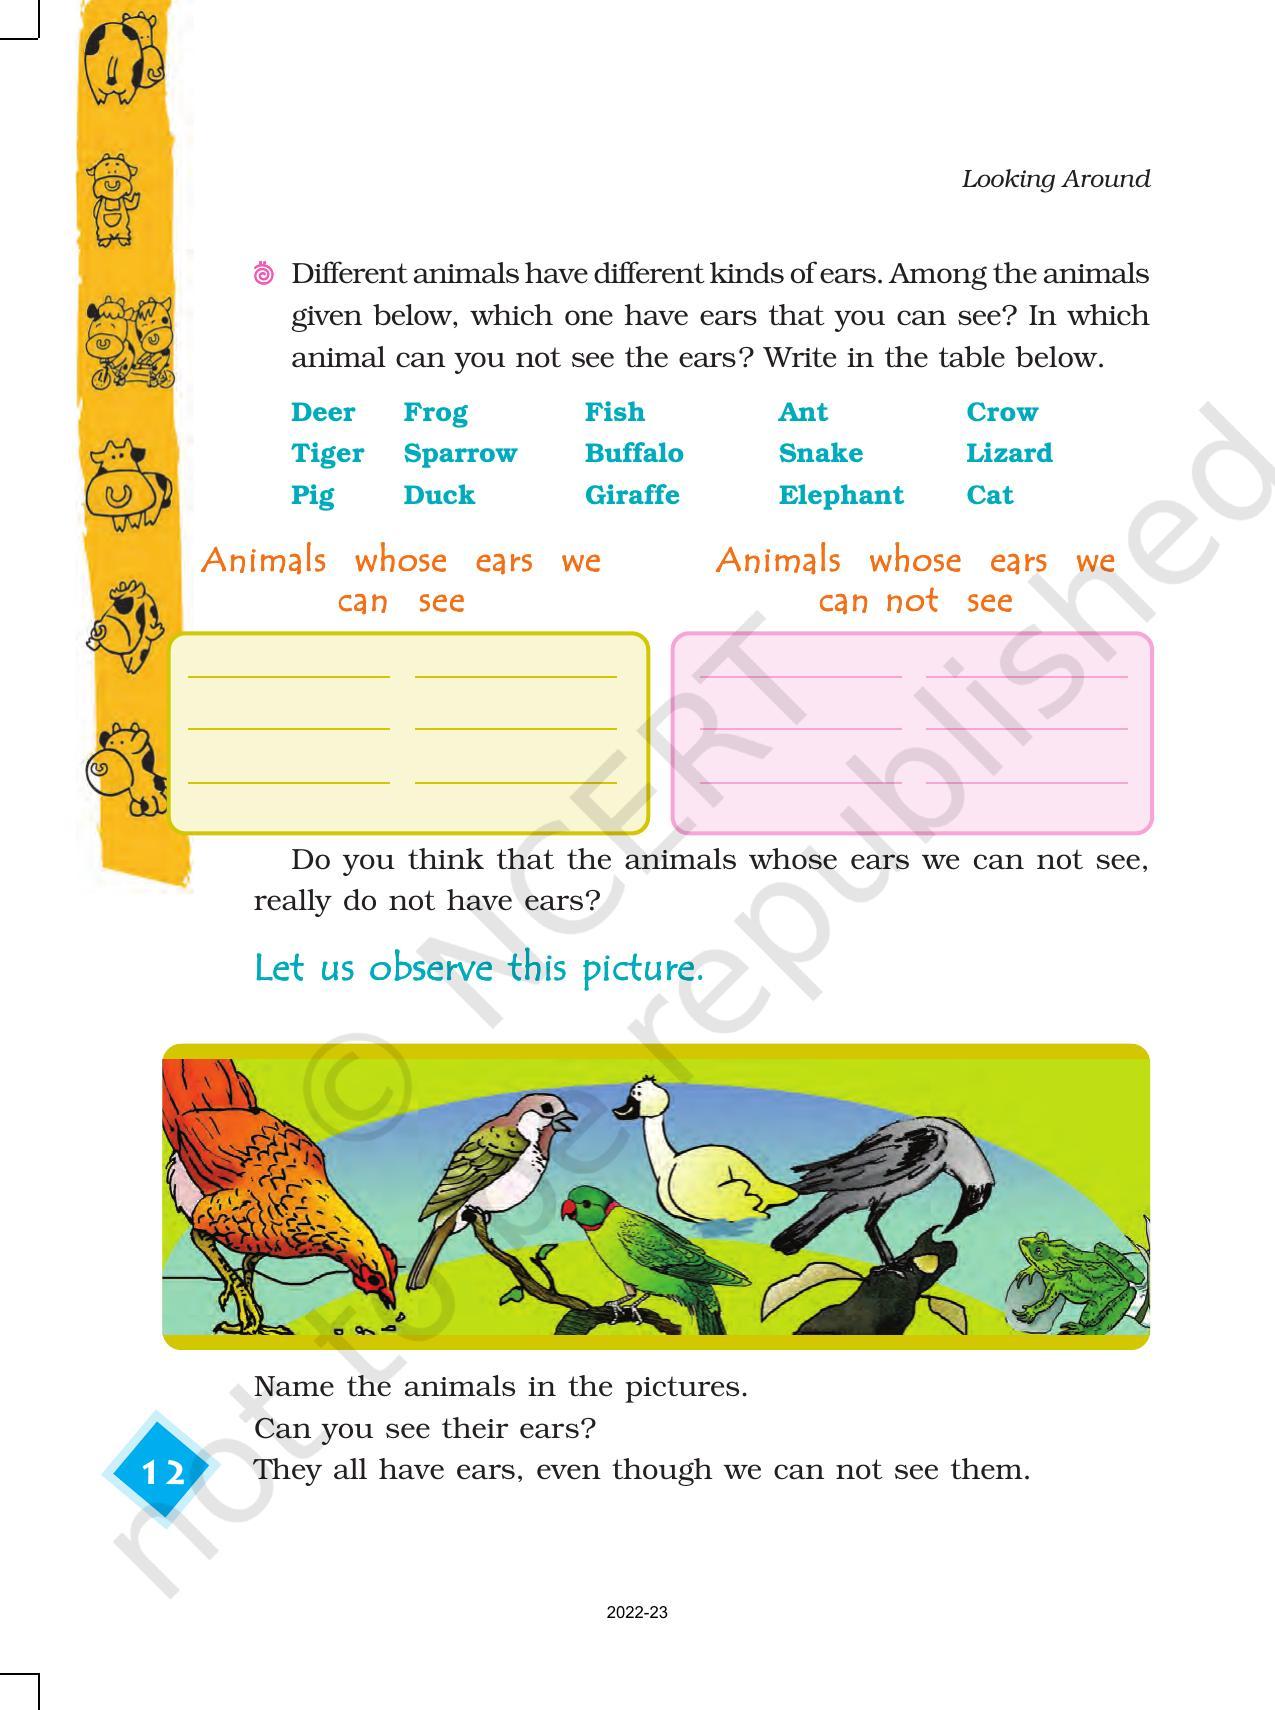 NCERT Book for Class 4 EVS Chapter 2 Ear to Ear - Page 2